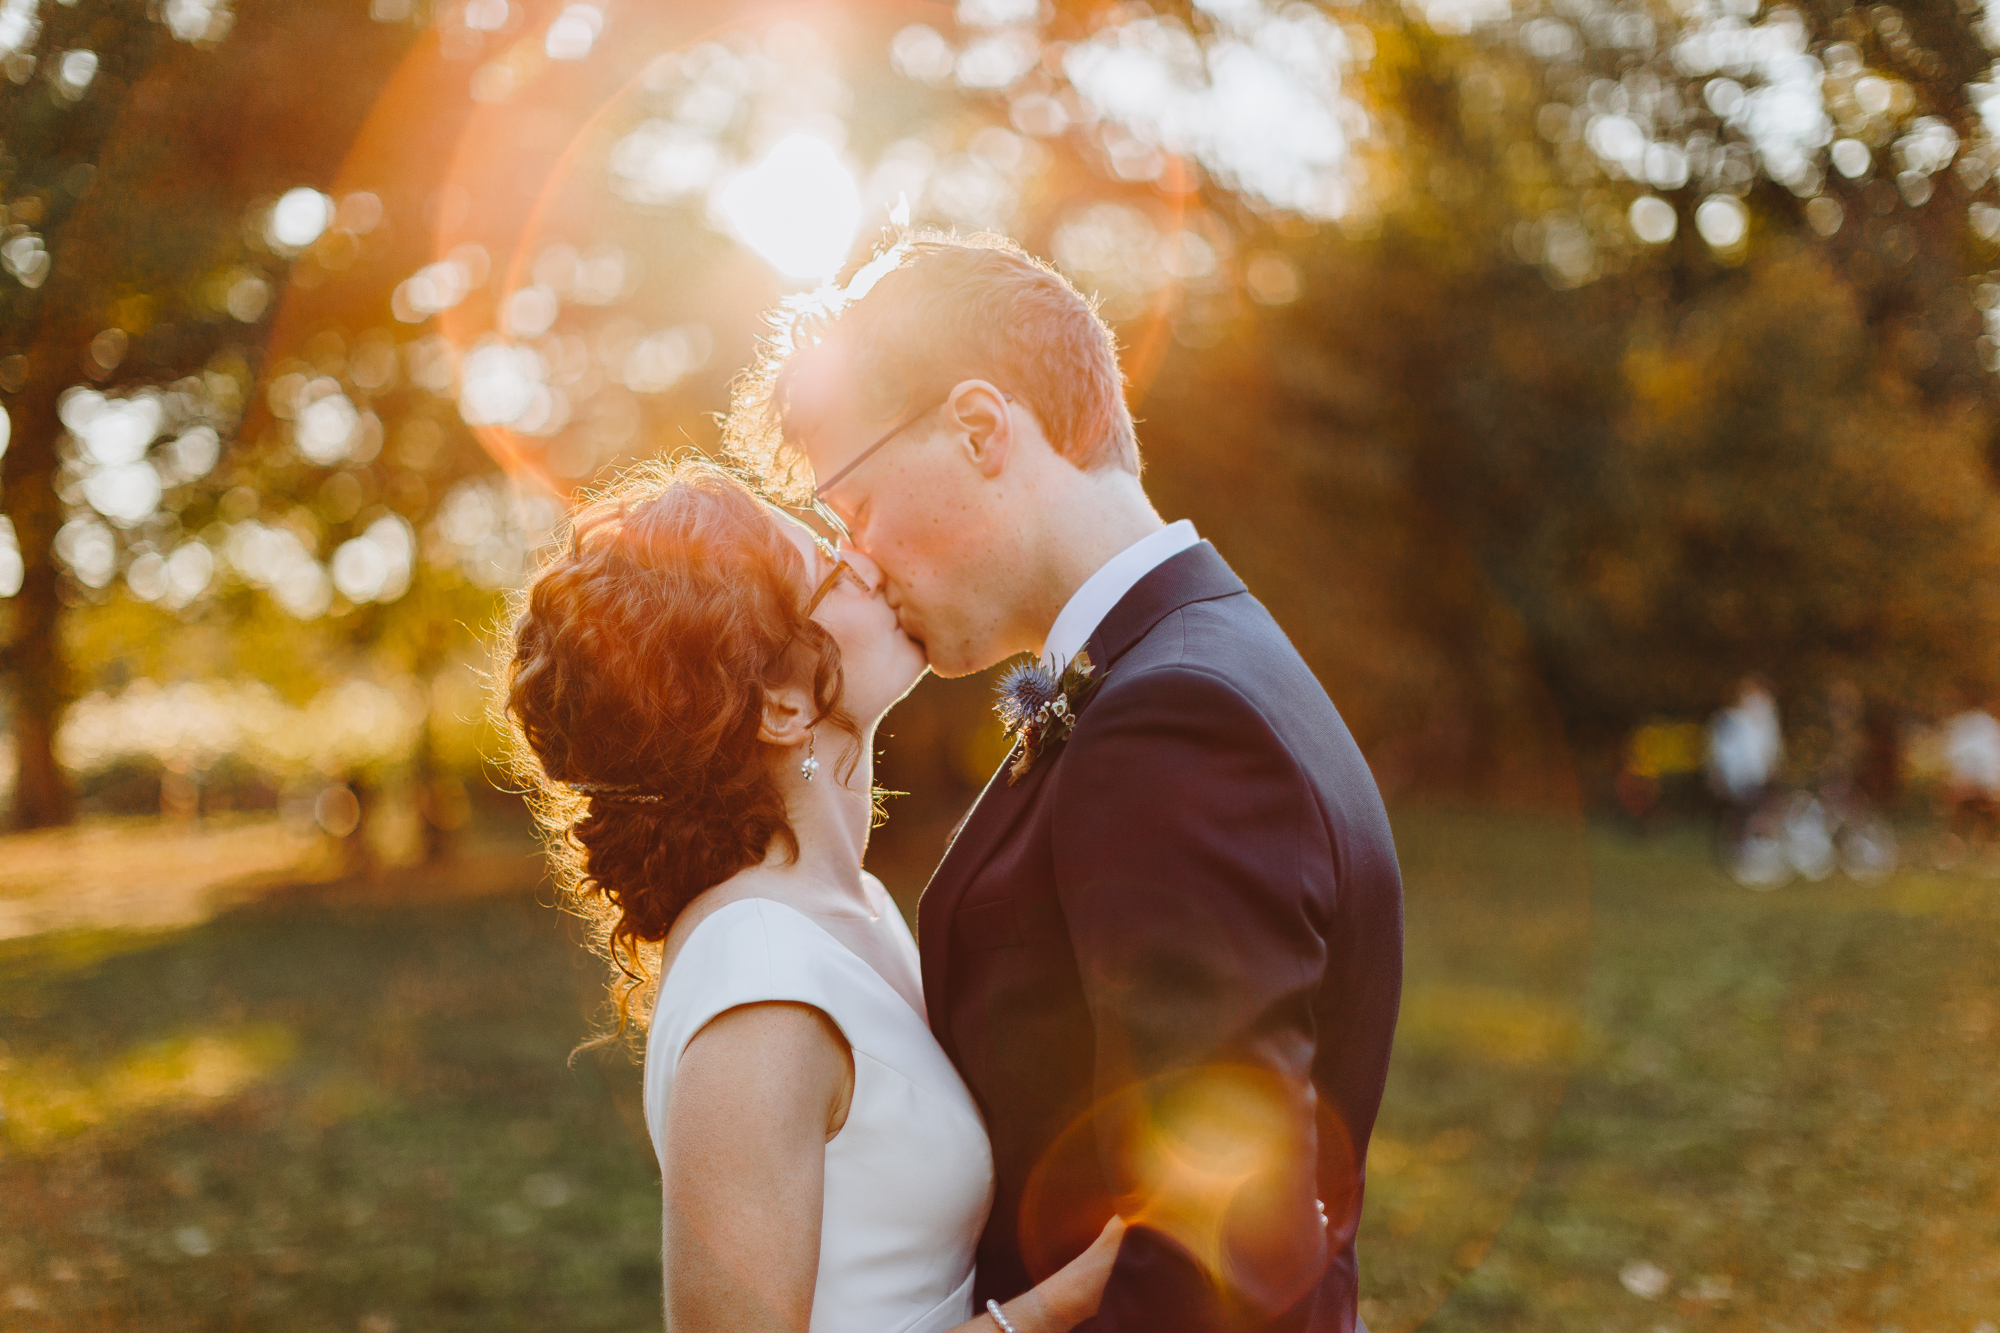 Romantic golden hour wedding photos in Prospect Park during the fall